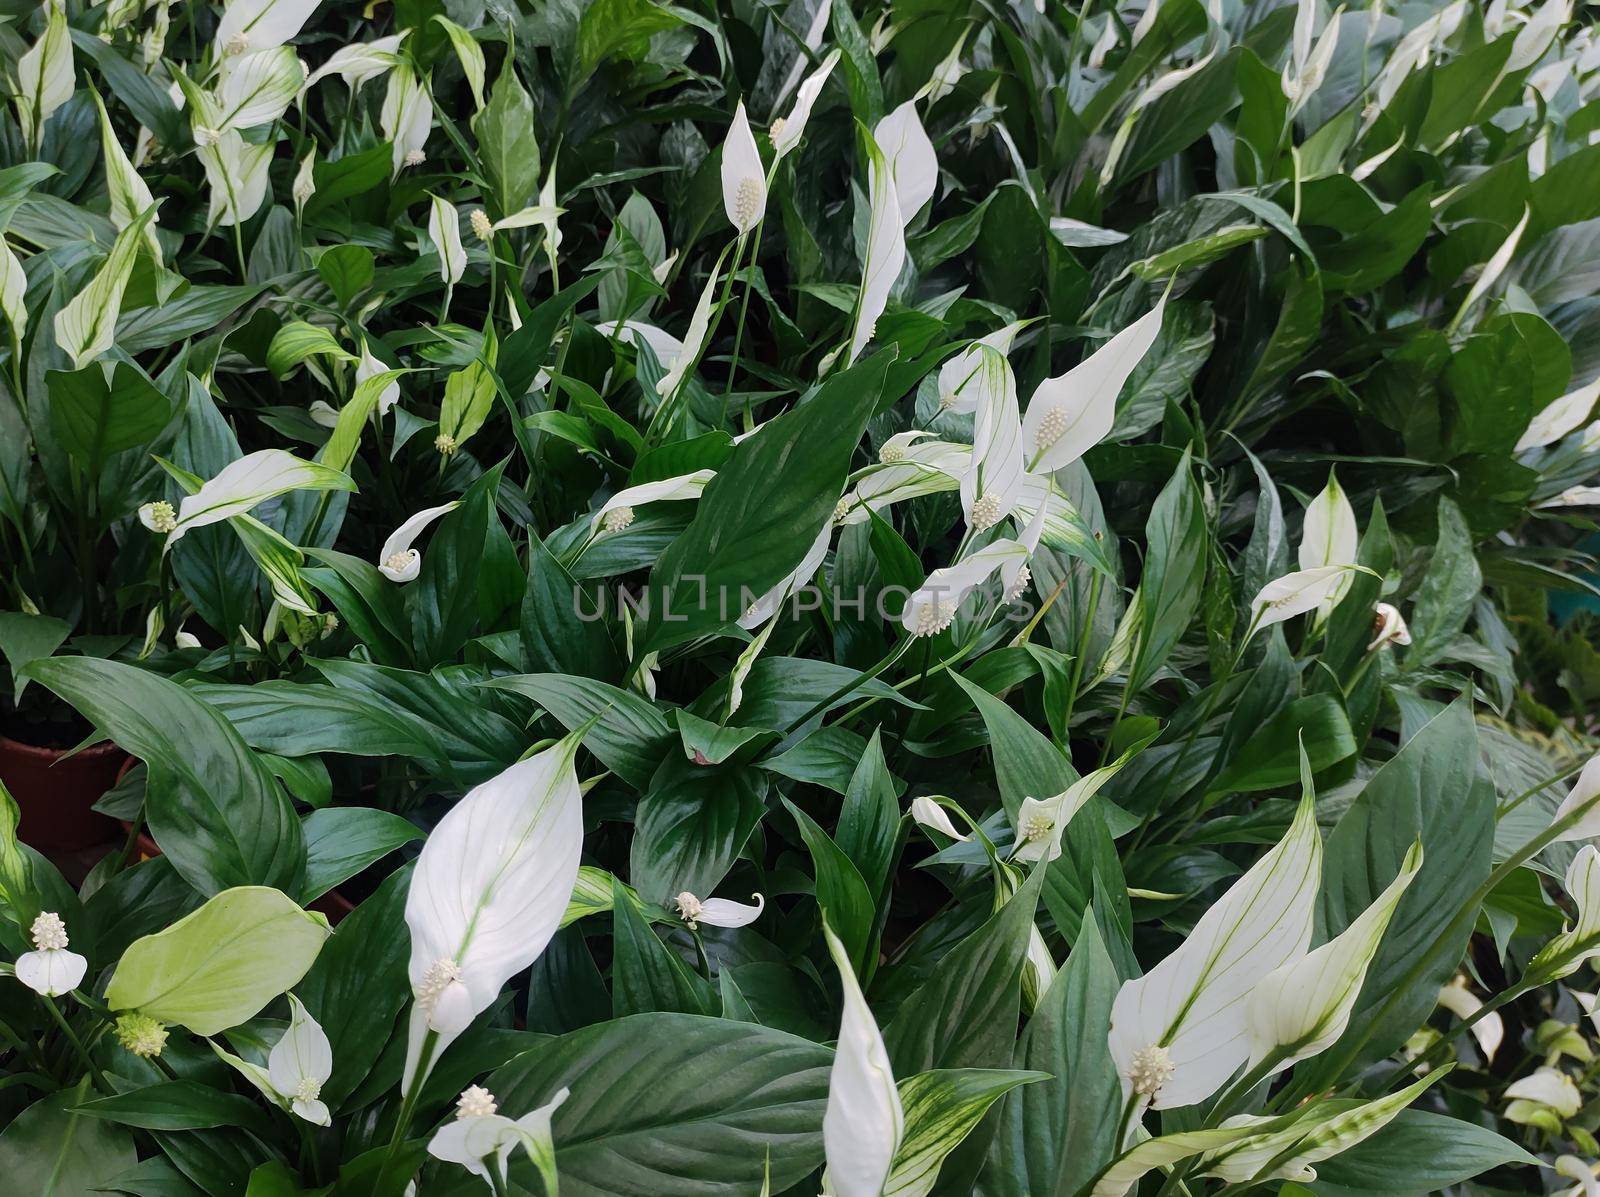 Garden bed with various flowers and foliage of peace lilies (Spathiphyllum wallisii), filling the picture.